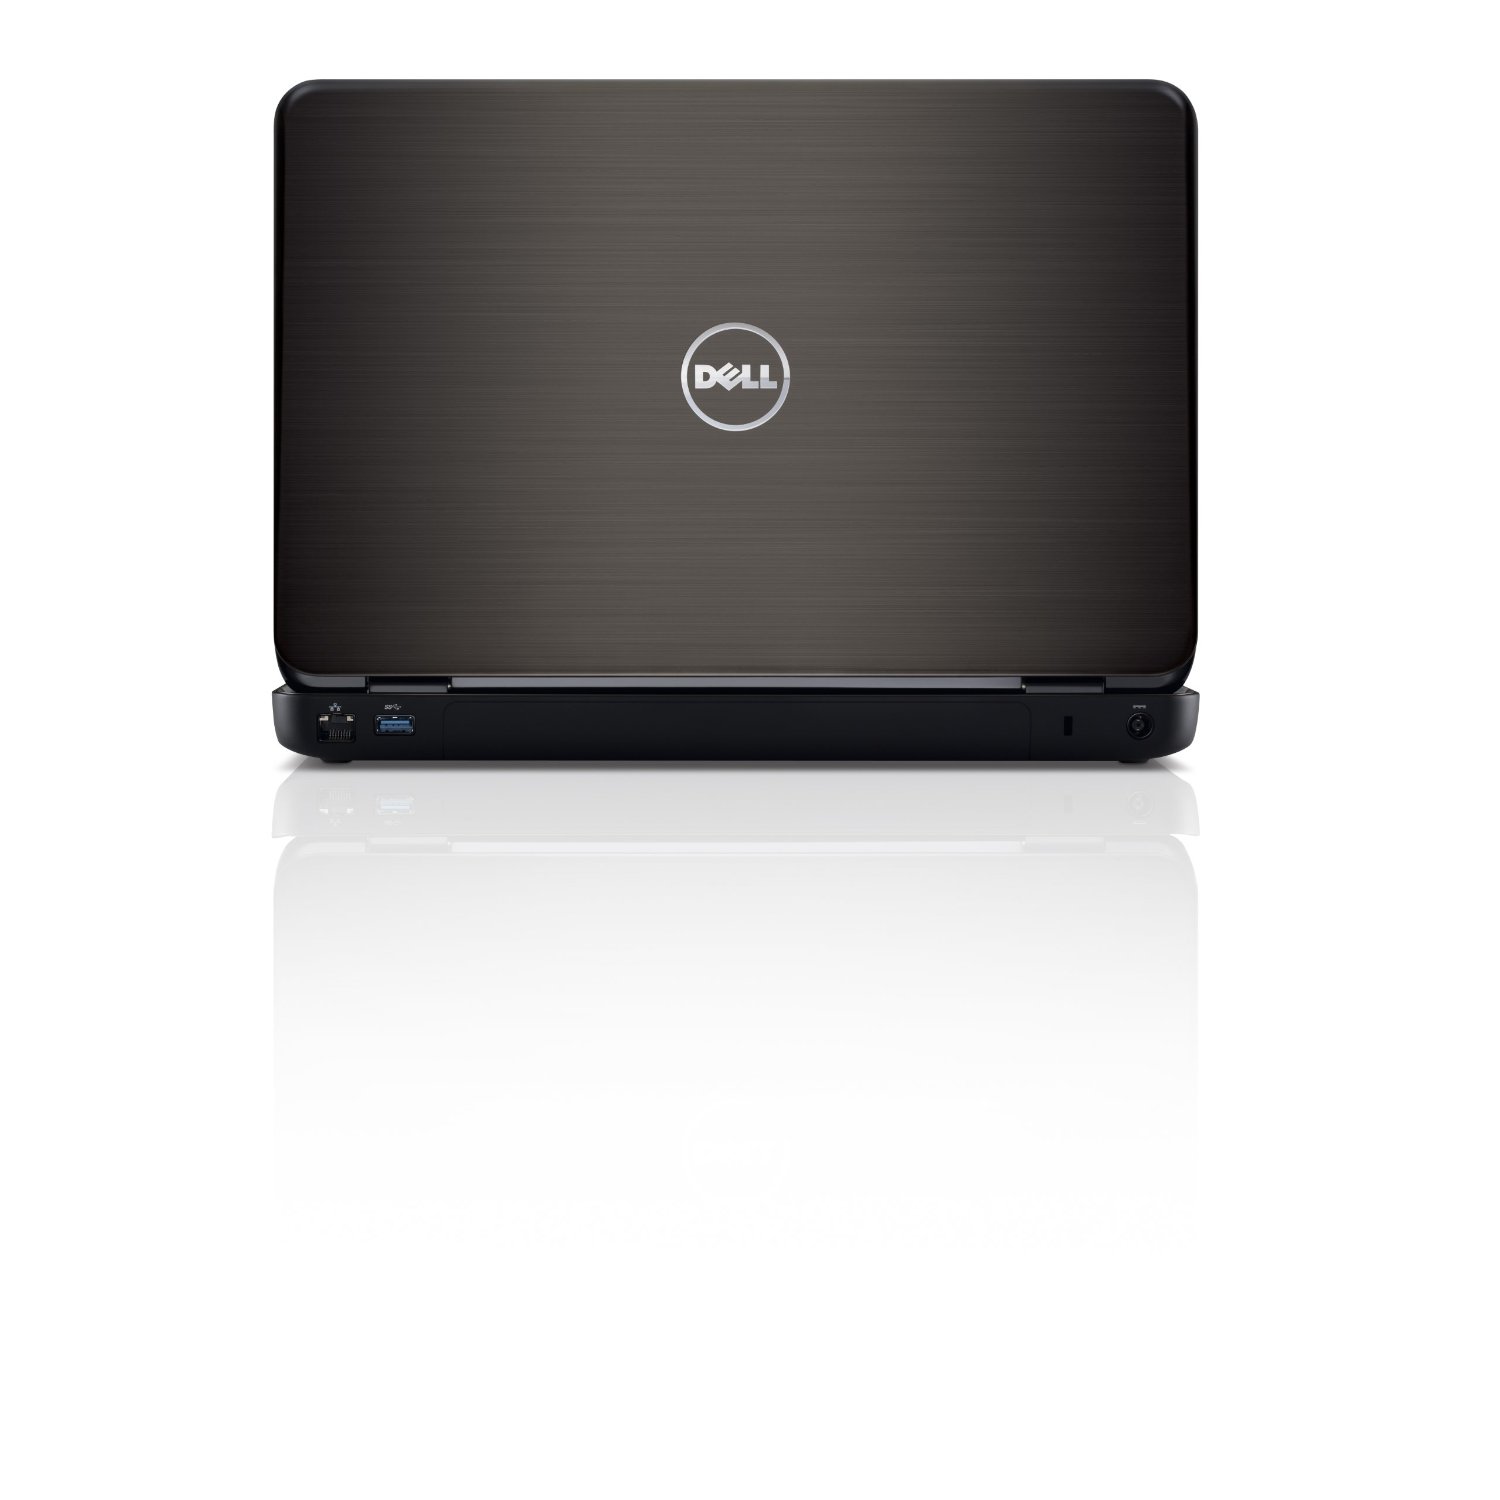 http://thetechjournal.com/wp-content/uploads/images/1111/1320857776-dell-inspiron-i14rn1364dbk-14inch-laptop-7.jpg